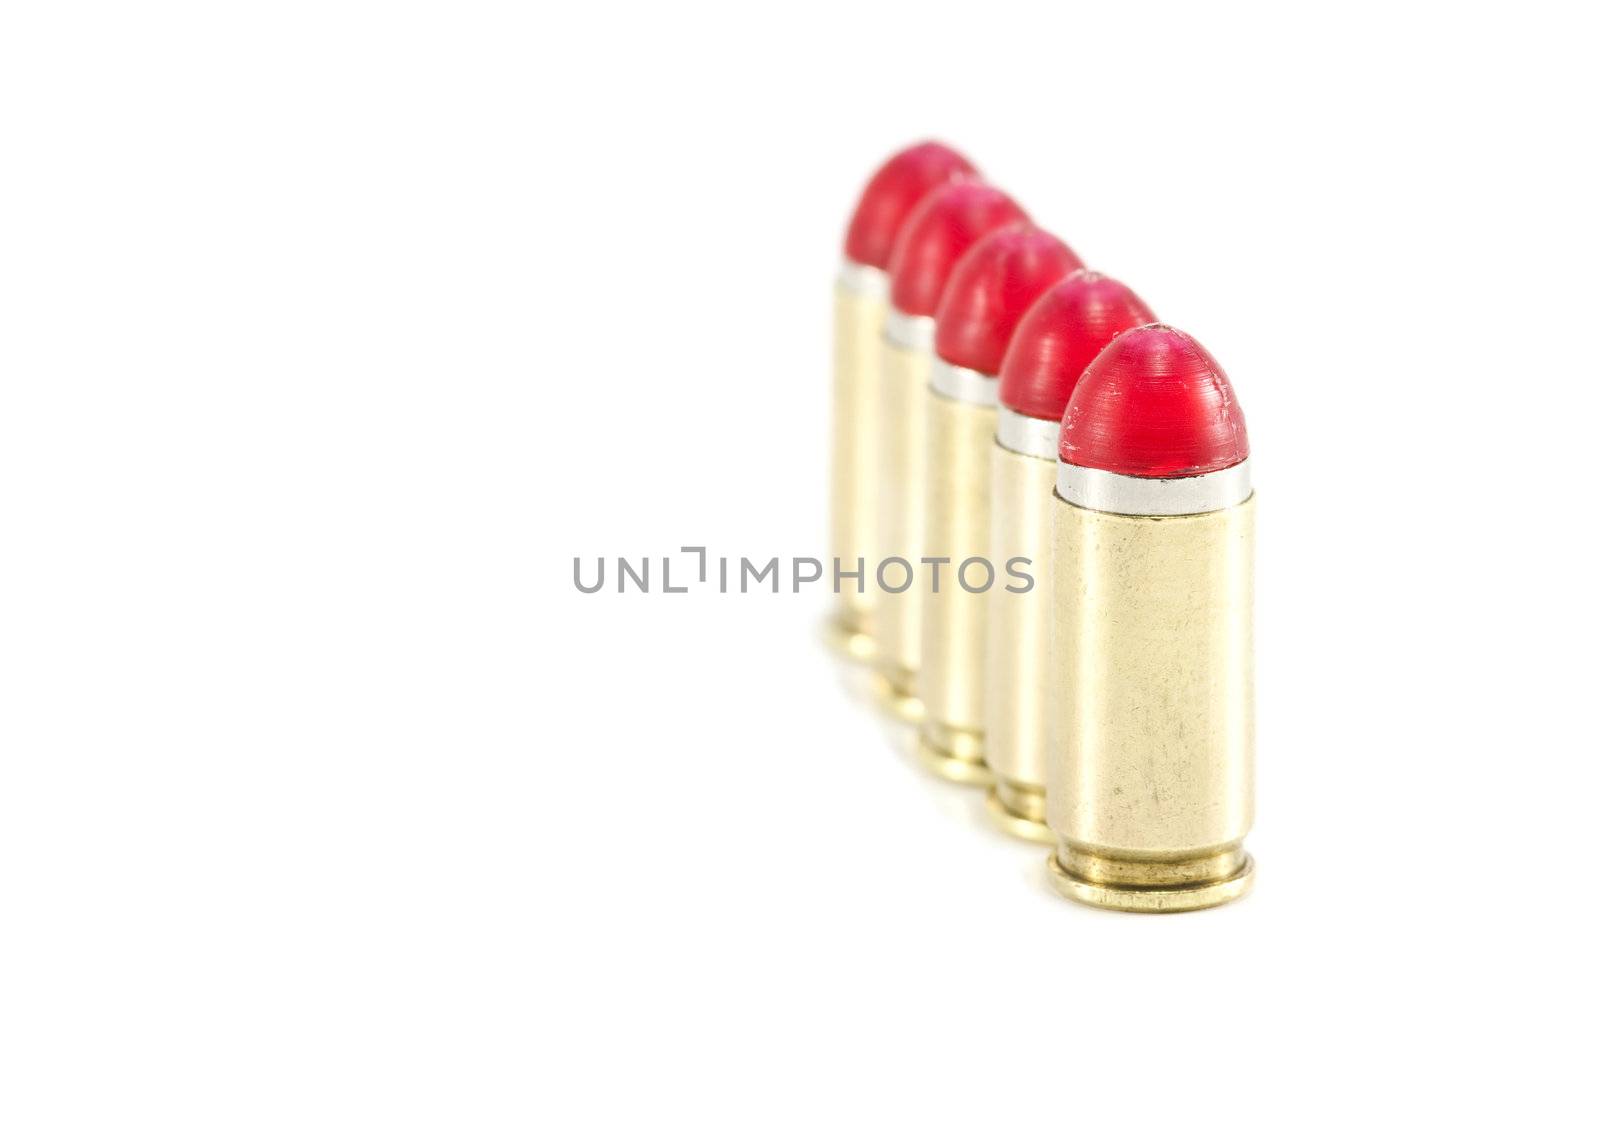 9mm Shock rounds / bullets lined up in a row by ChrisAlleaume